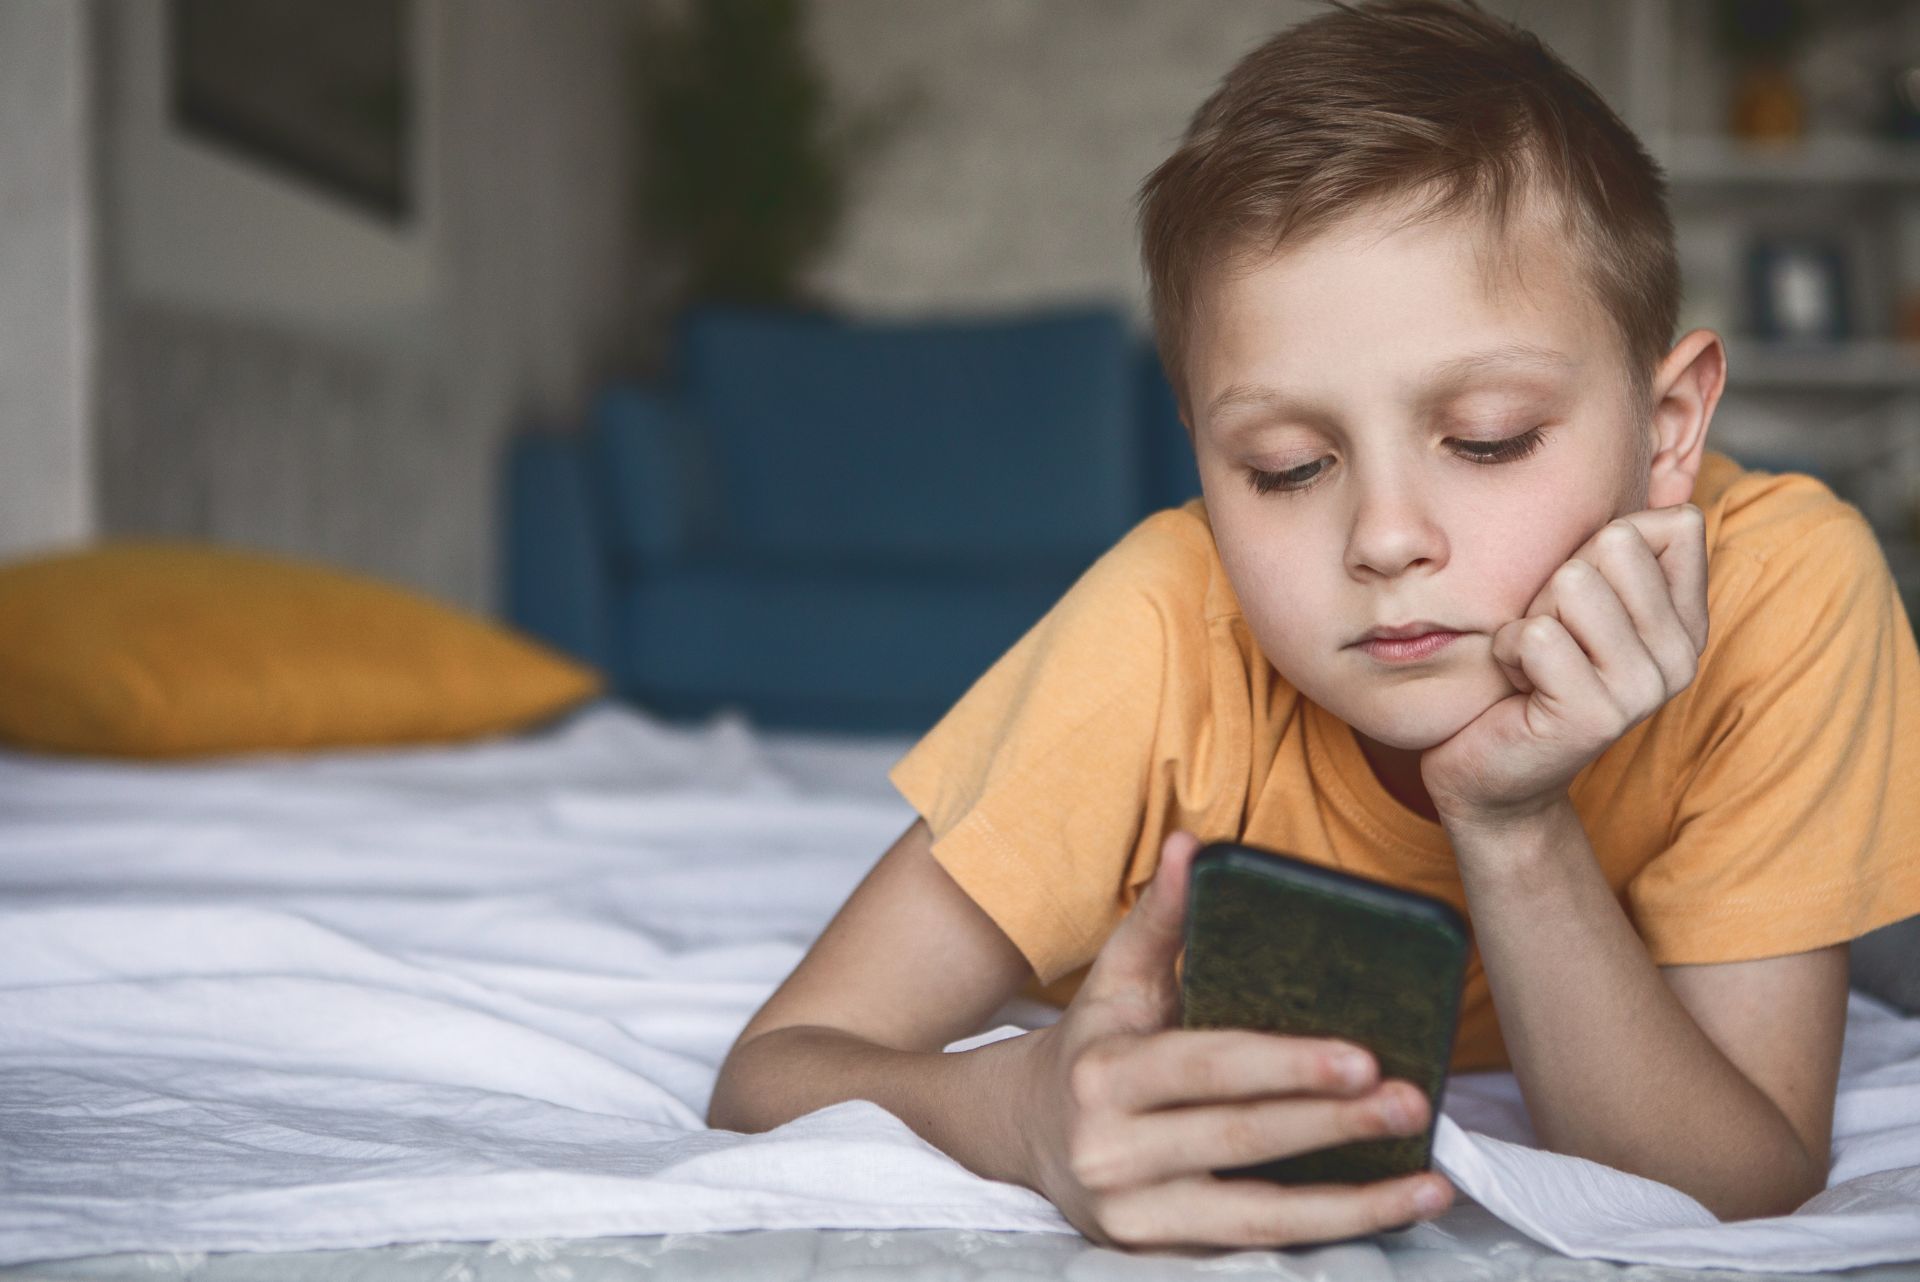 Kids and cell phone addiction